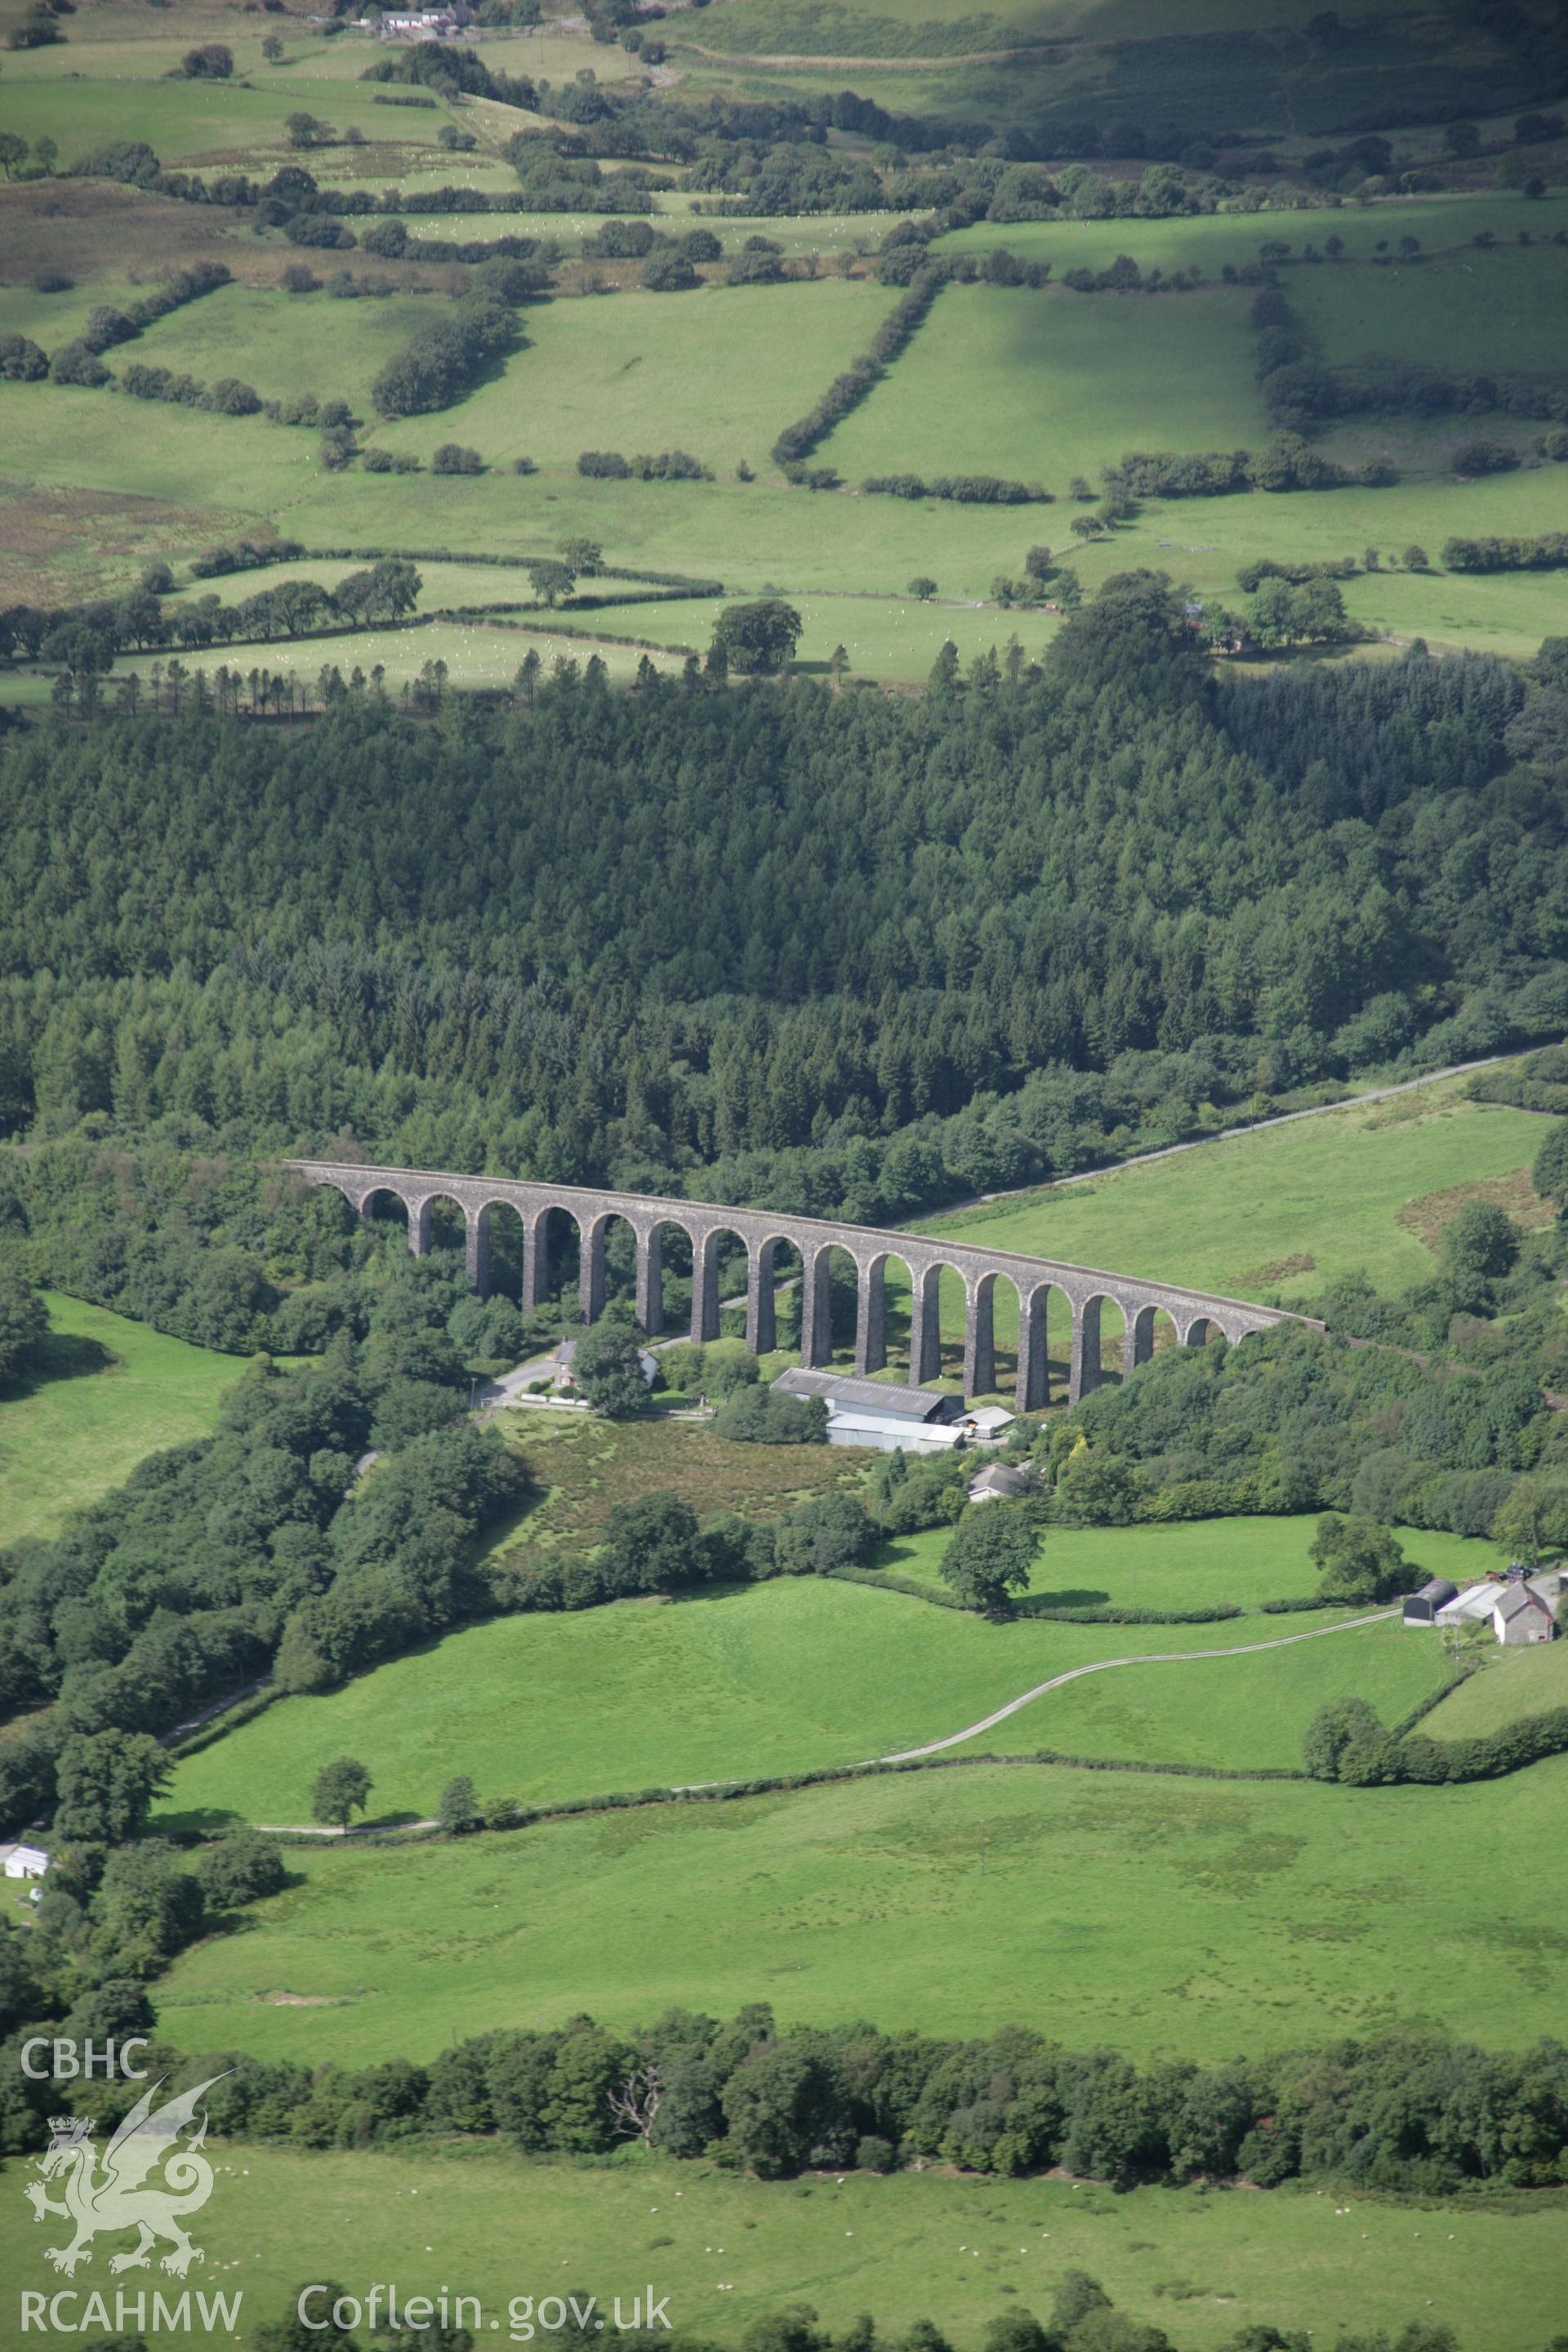 RCAHMW colour oblique aerial photograph of Cynghordy Railway Viaduct from the east. Taken on 02 September 2005 by Toby Driver